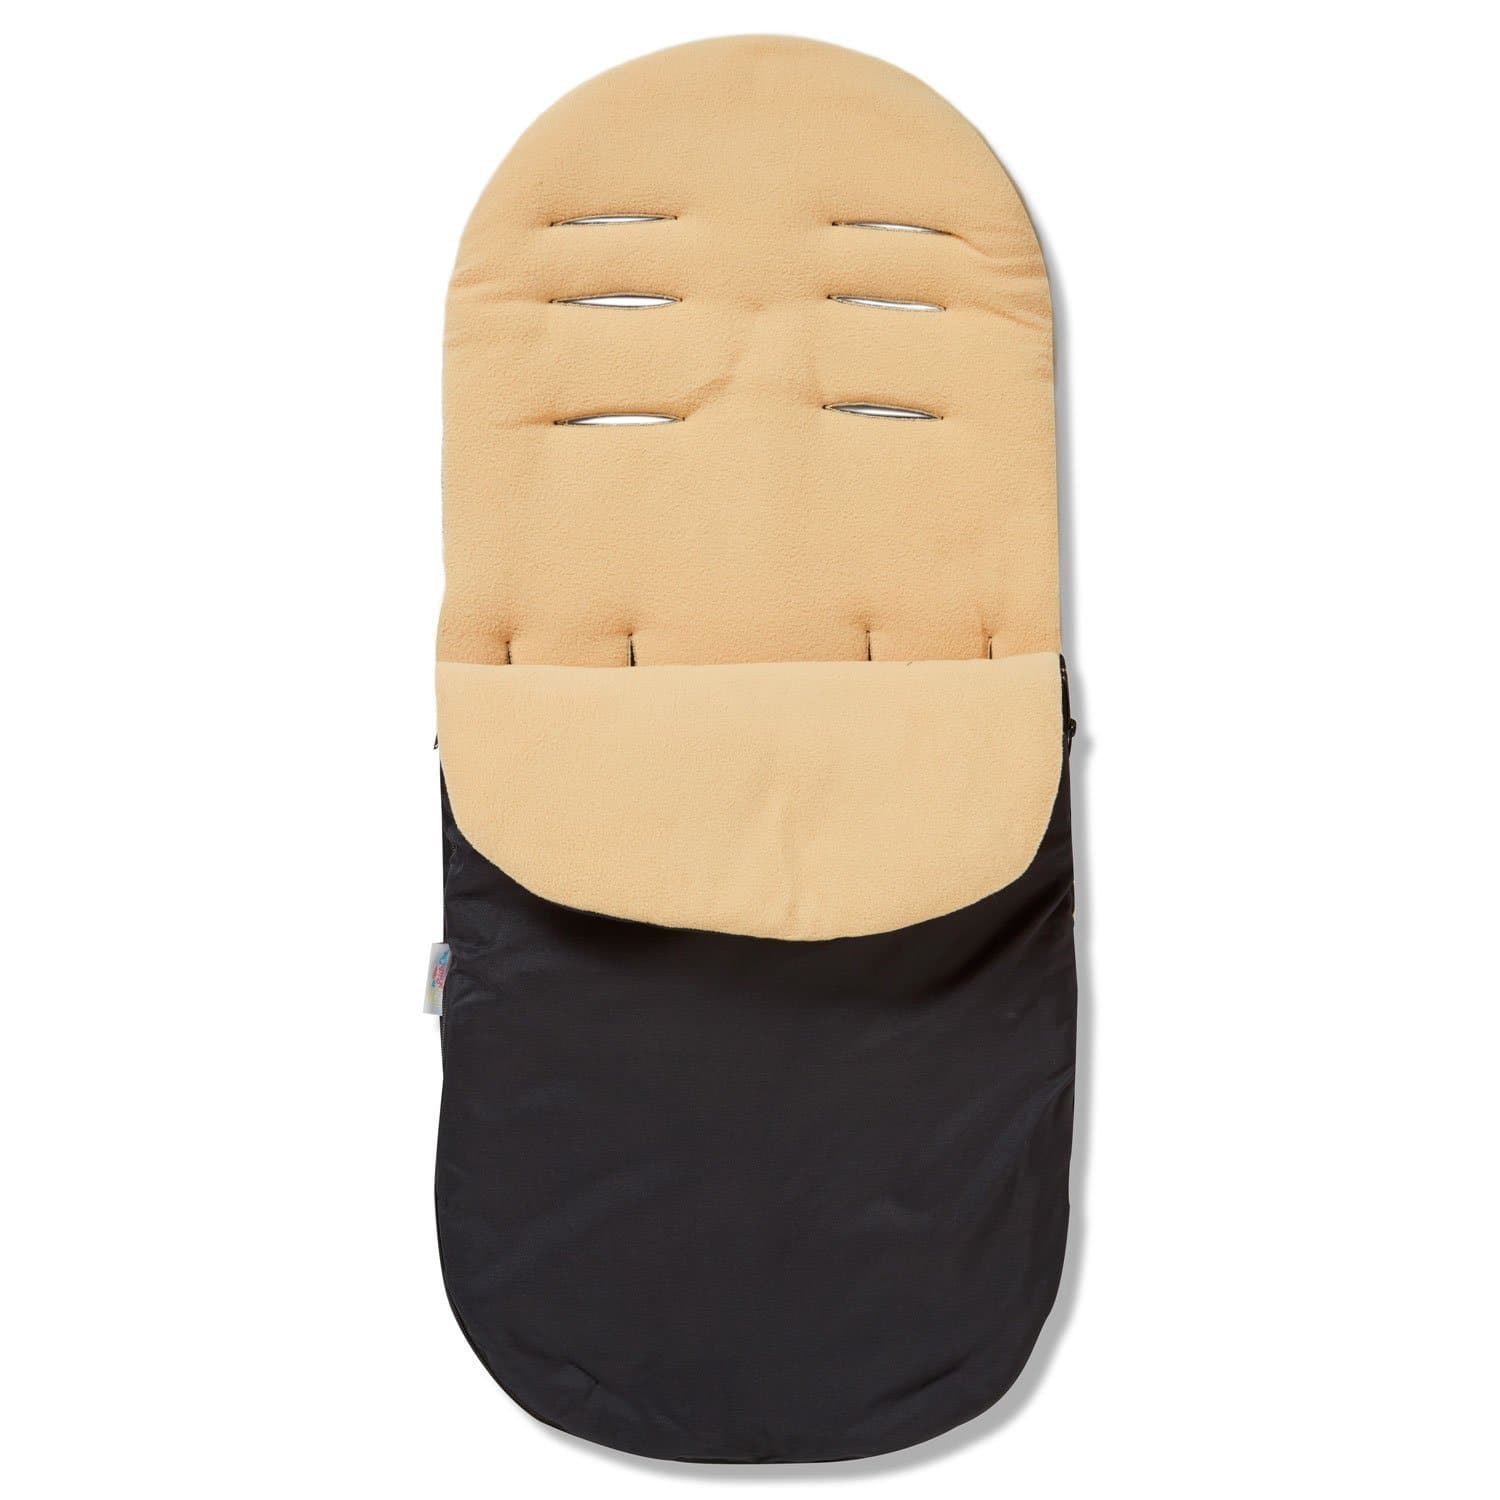 Footmuff / Cosy Toes Compatible with Gesslein - For Your Little One